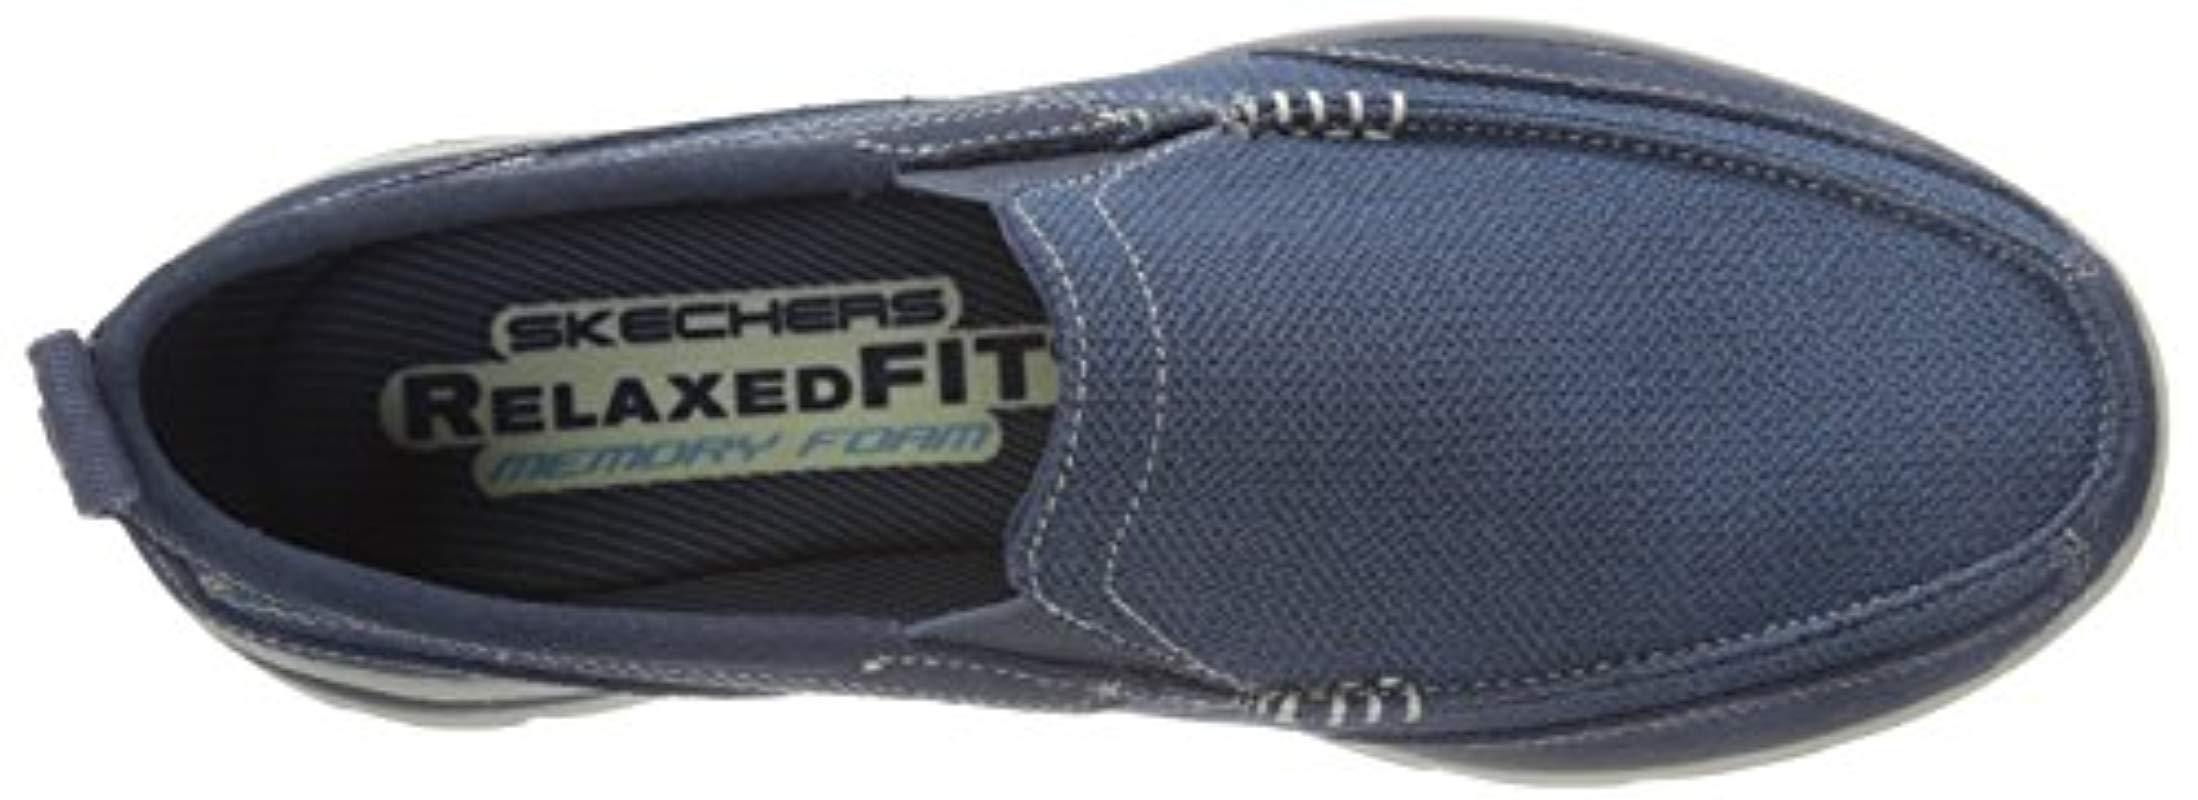 skechers men's superior milford loafers